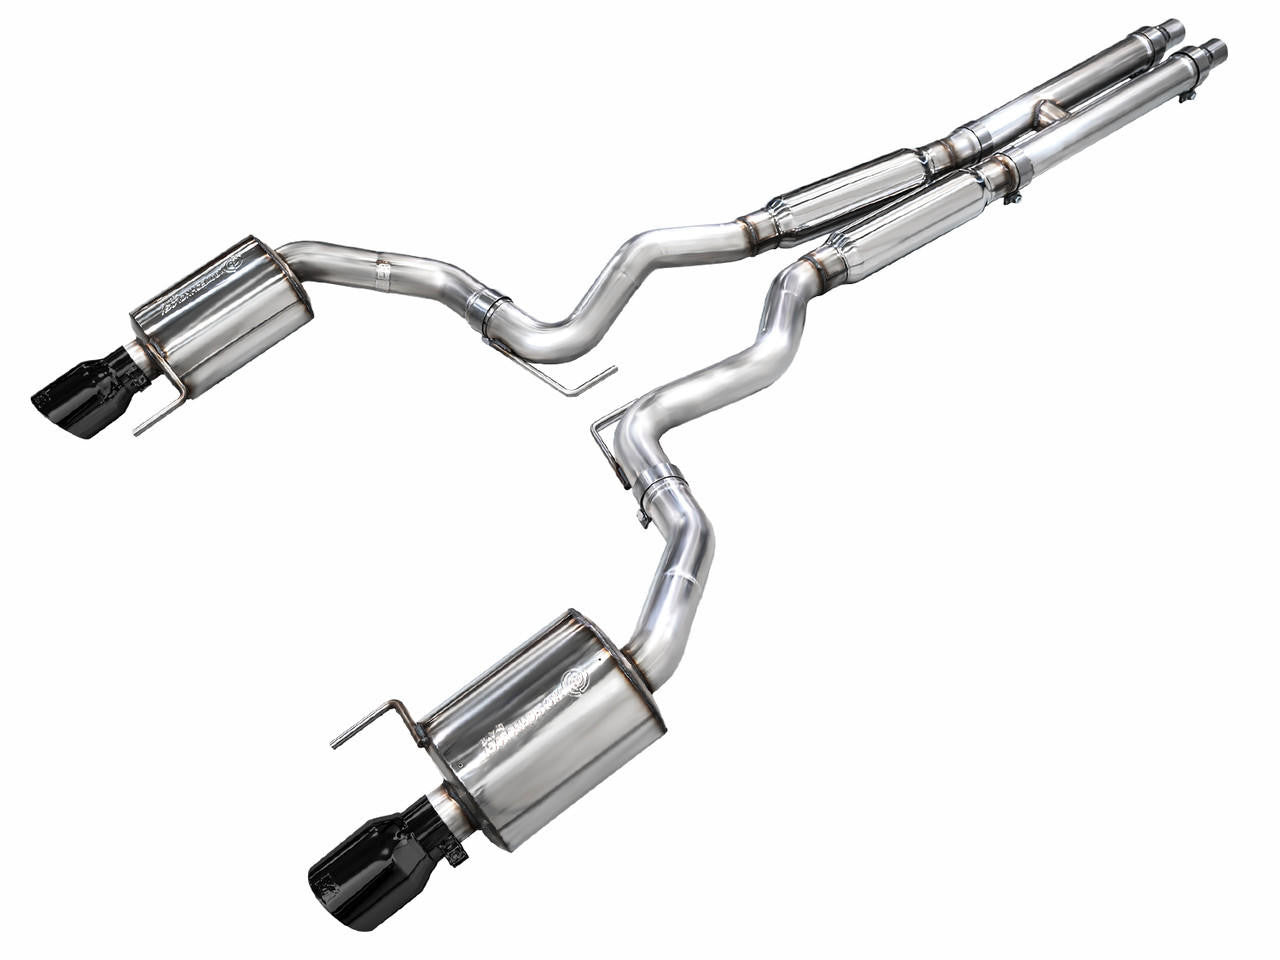 AWE Tuning AWE Touring Edition Exhaust for S650 Mustang GT Fastback - Dual Diamond Black Tips 3015-33650 